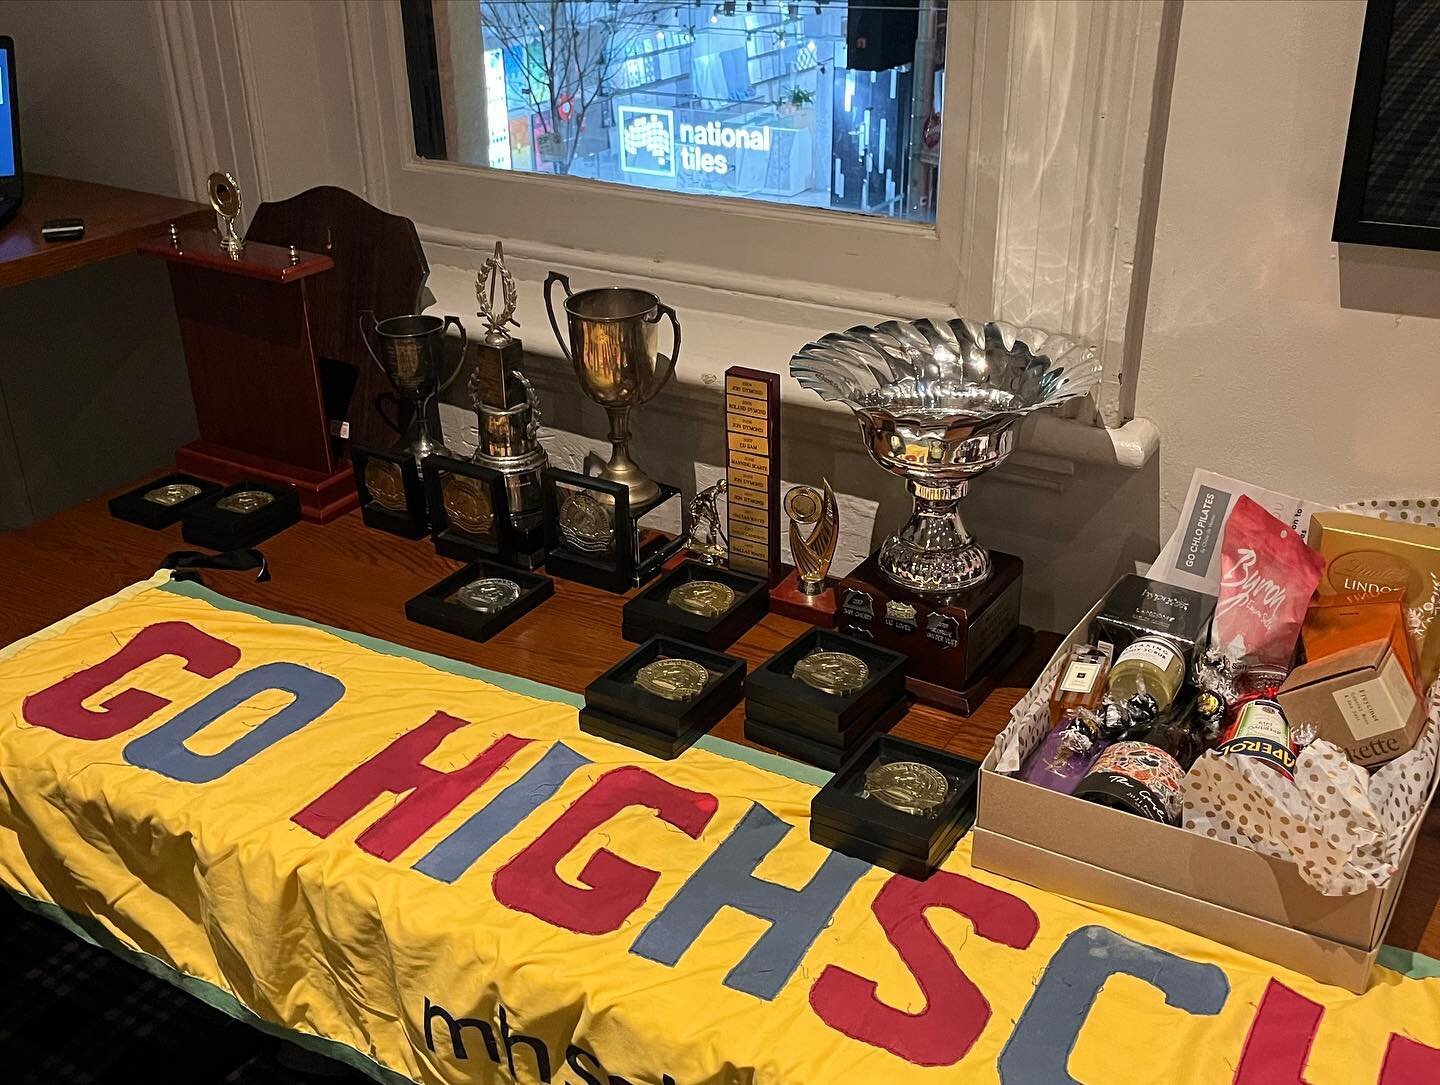 That&rsquo;s a wrap for season 2022! Great season and night had by all 🦄🏑 See you all on the pitch for summer hockey soon! #mhsobhc #presentationnight #hockey